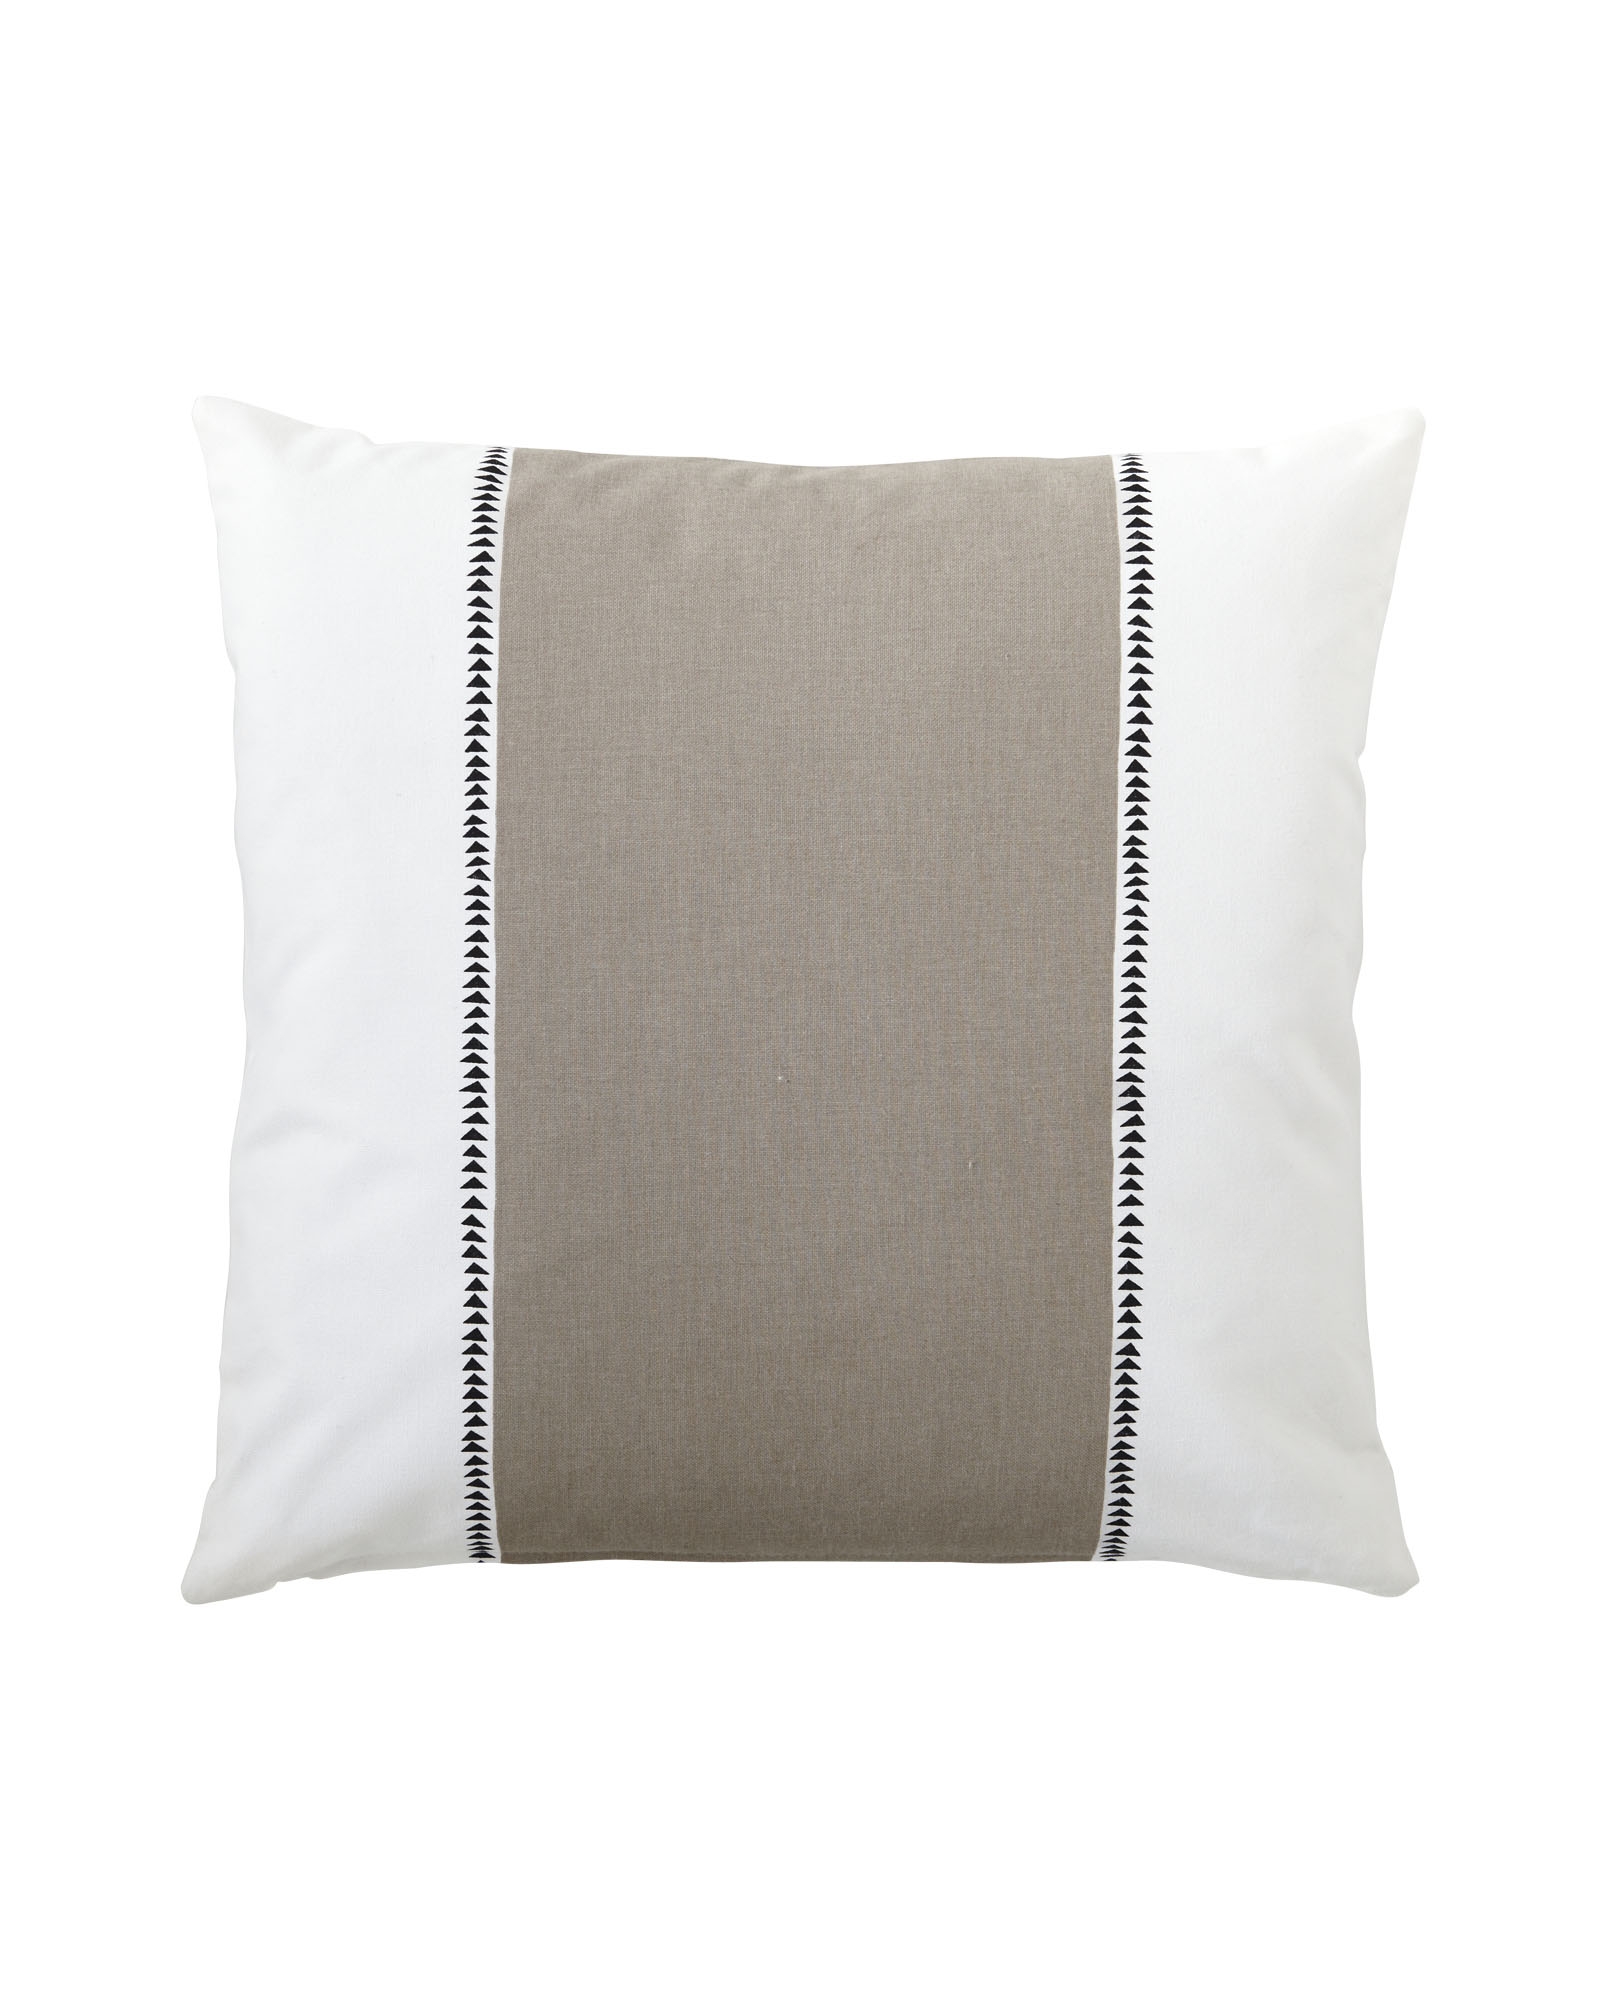 Racing Stripe Pillow Cover - Bark - 20x20 - Insert Sold Separately - Image 0